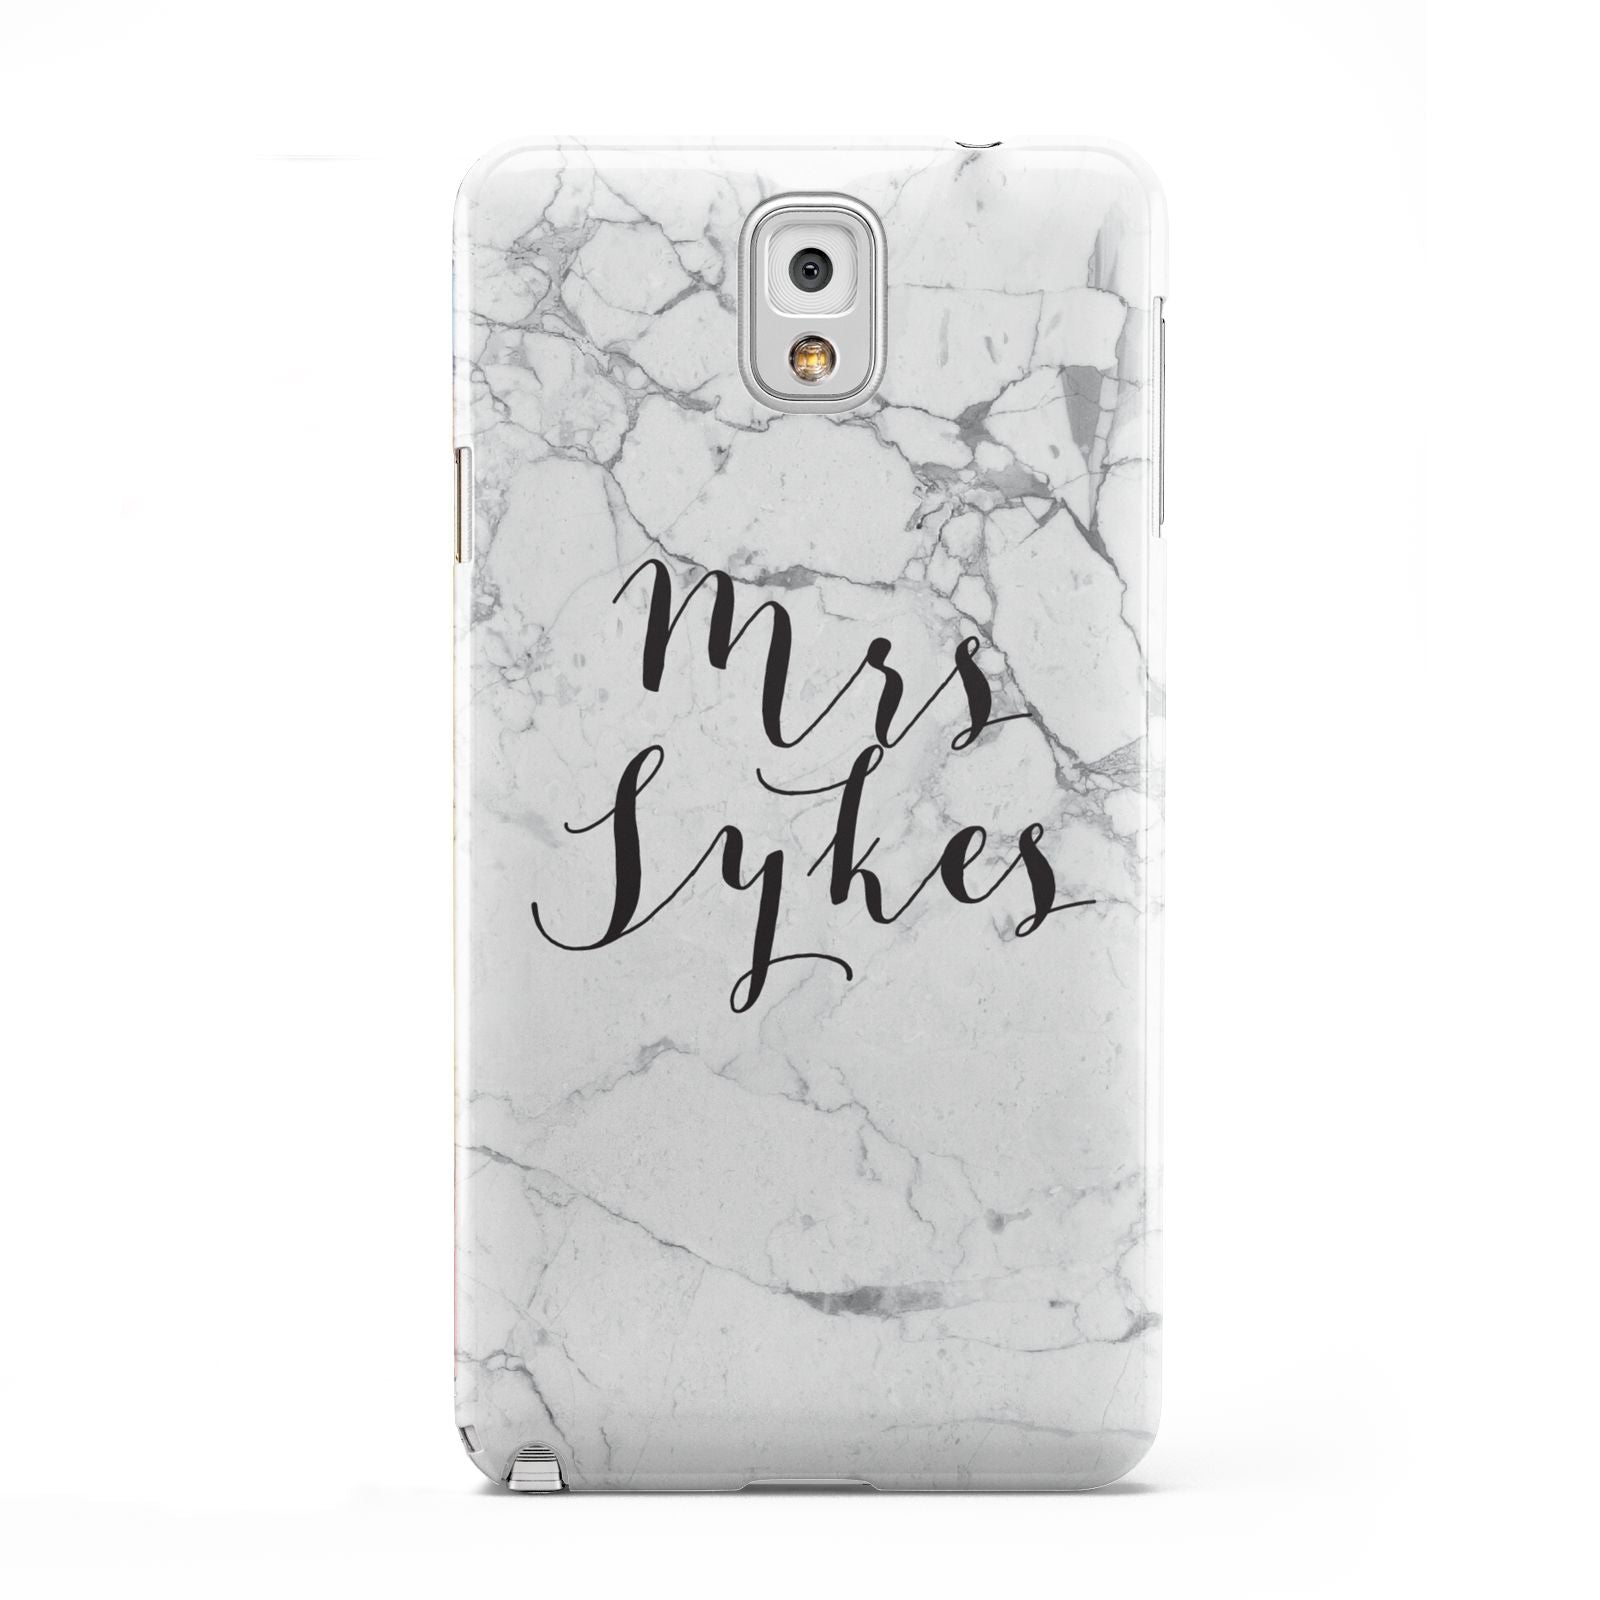 Surname Personalised Marble Samsung Galaxy Note 3 Case